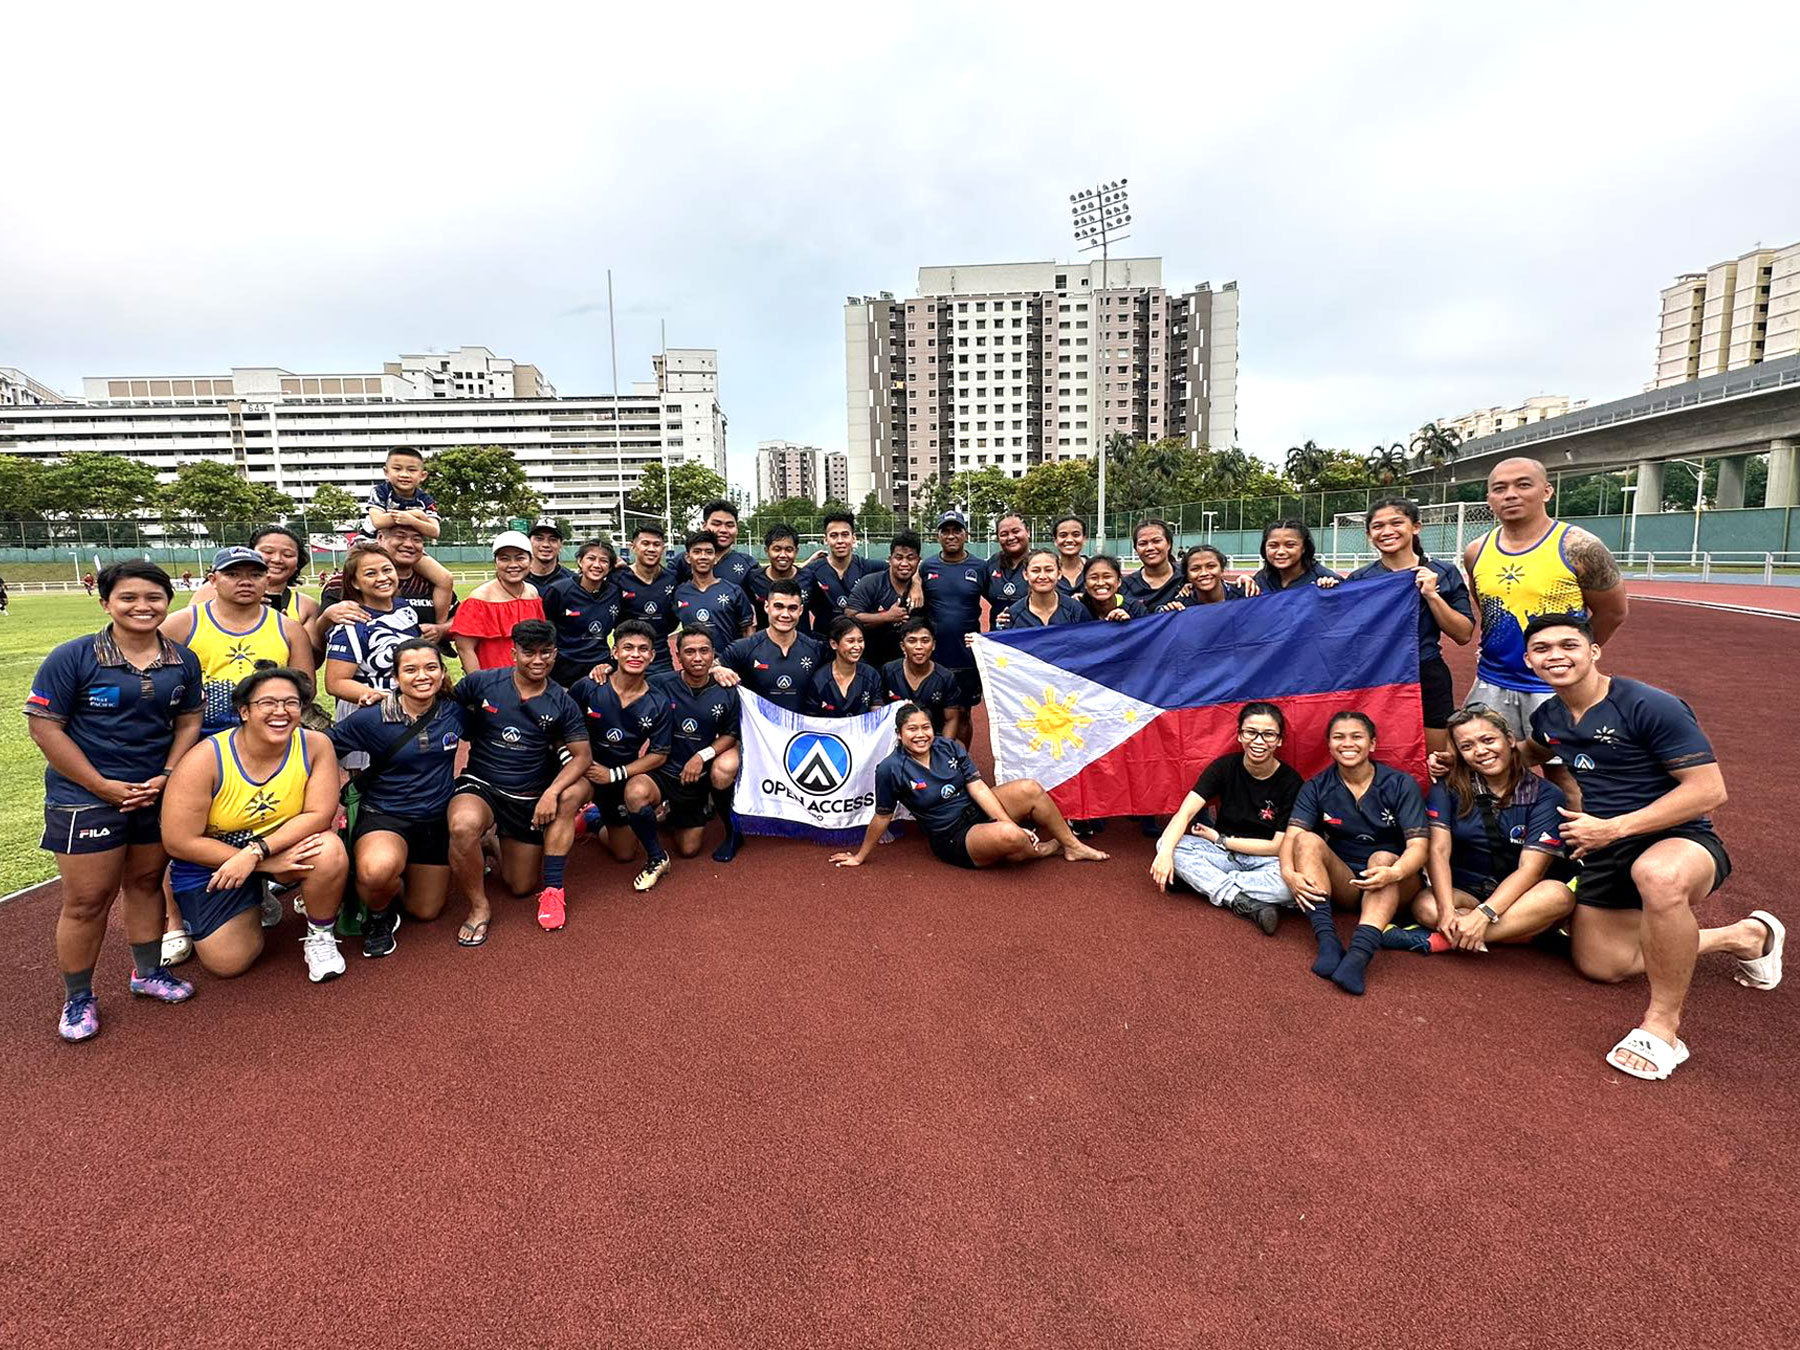 Open Access BPO Rugby team Rising Stars in Singapore